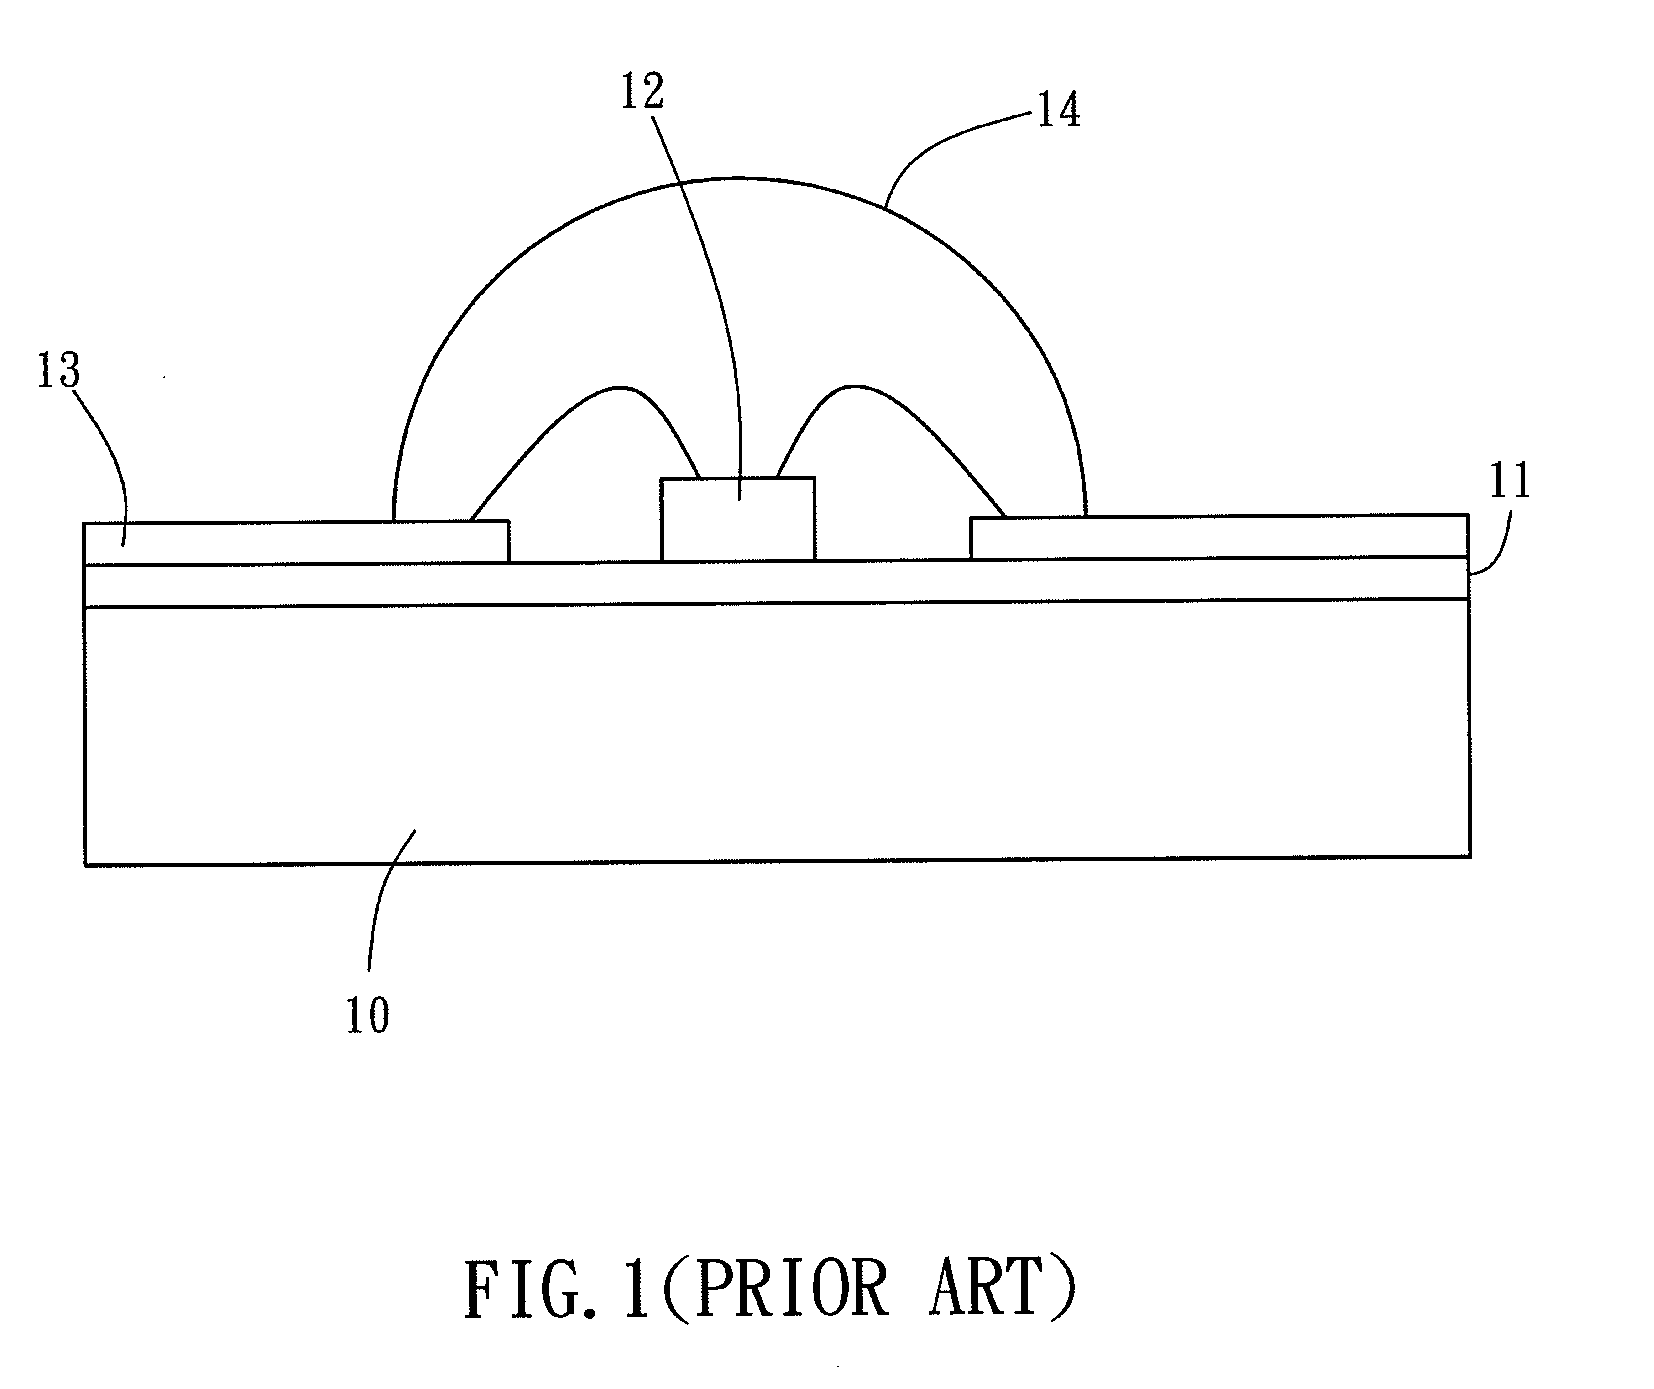 Illuminating device and packaging method thereof